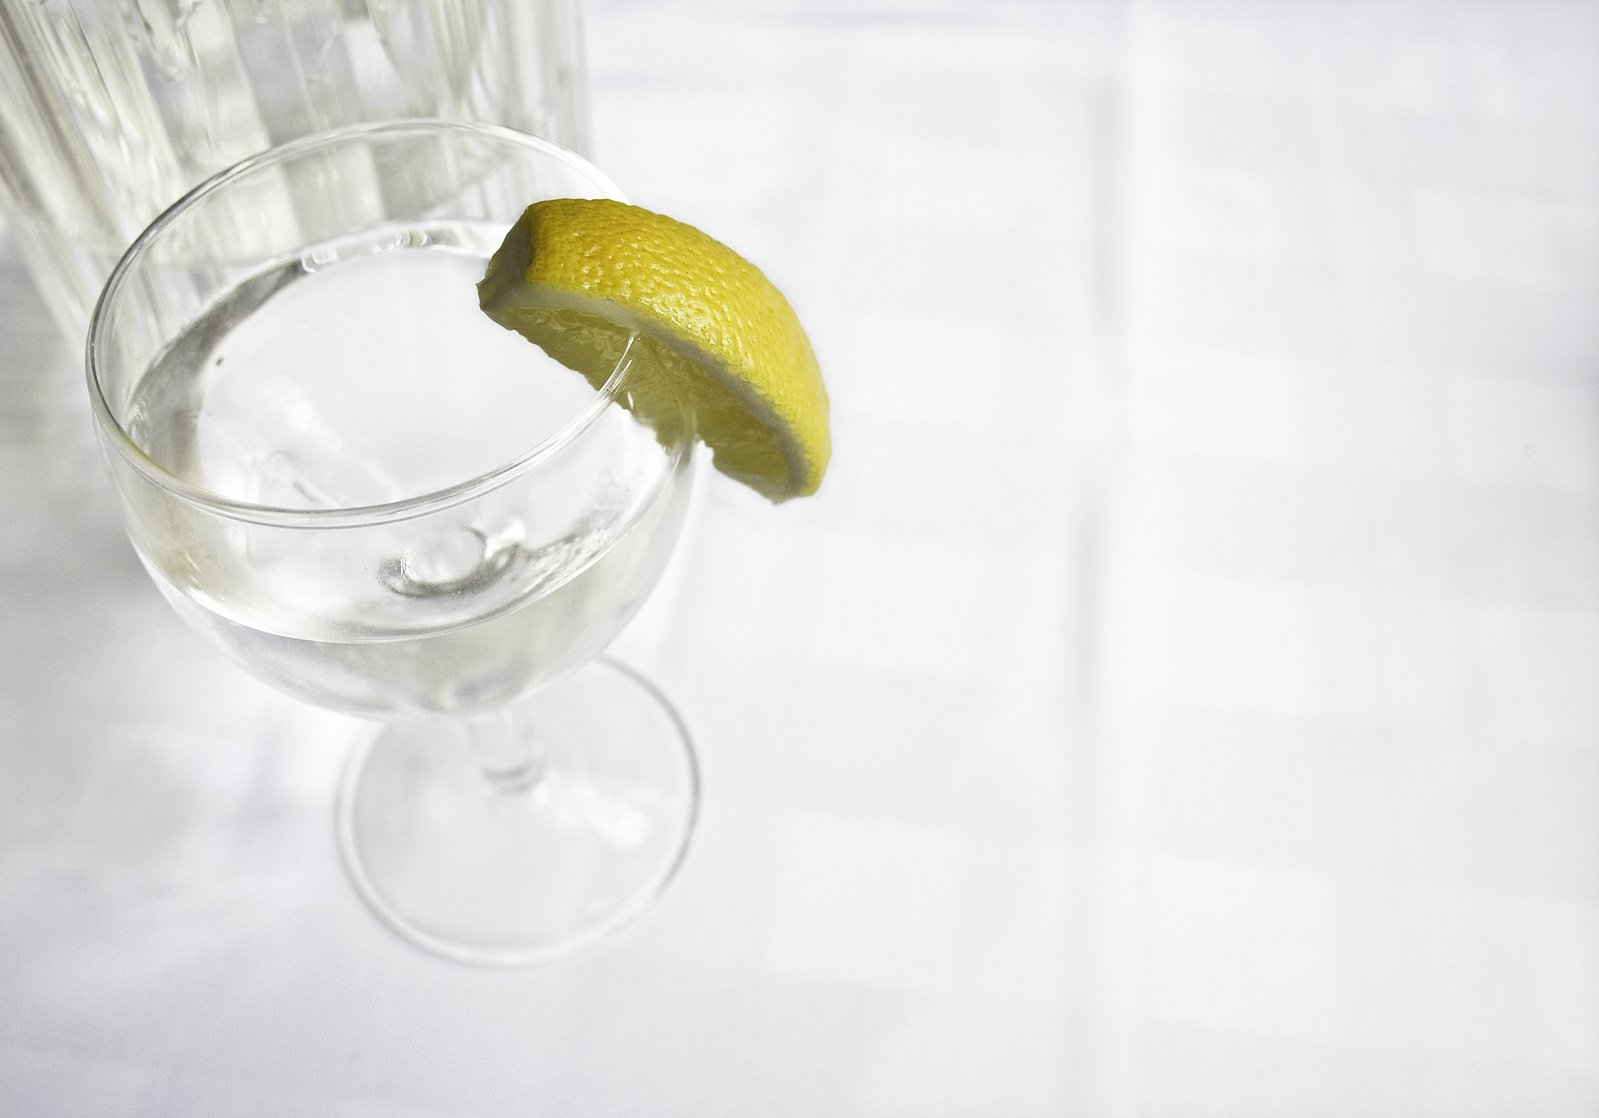 a half finished margarita glass with one lemon peel